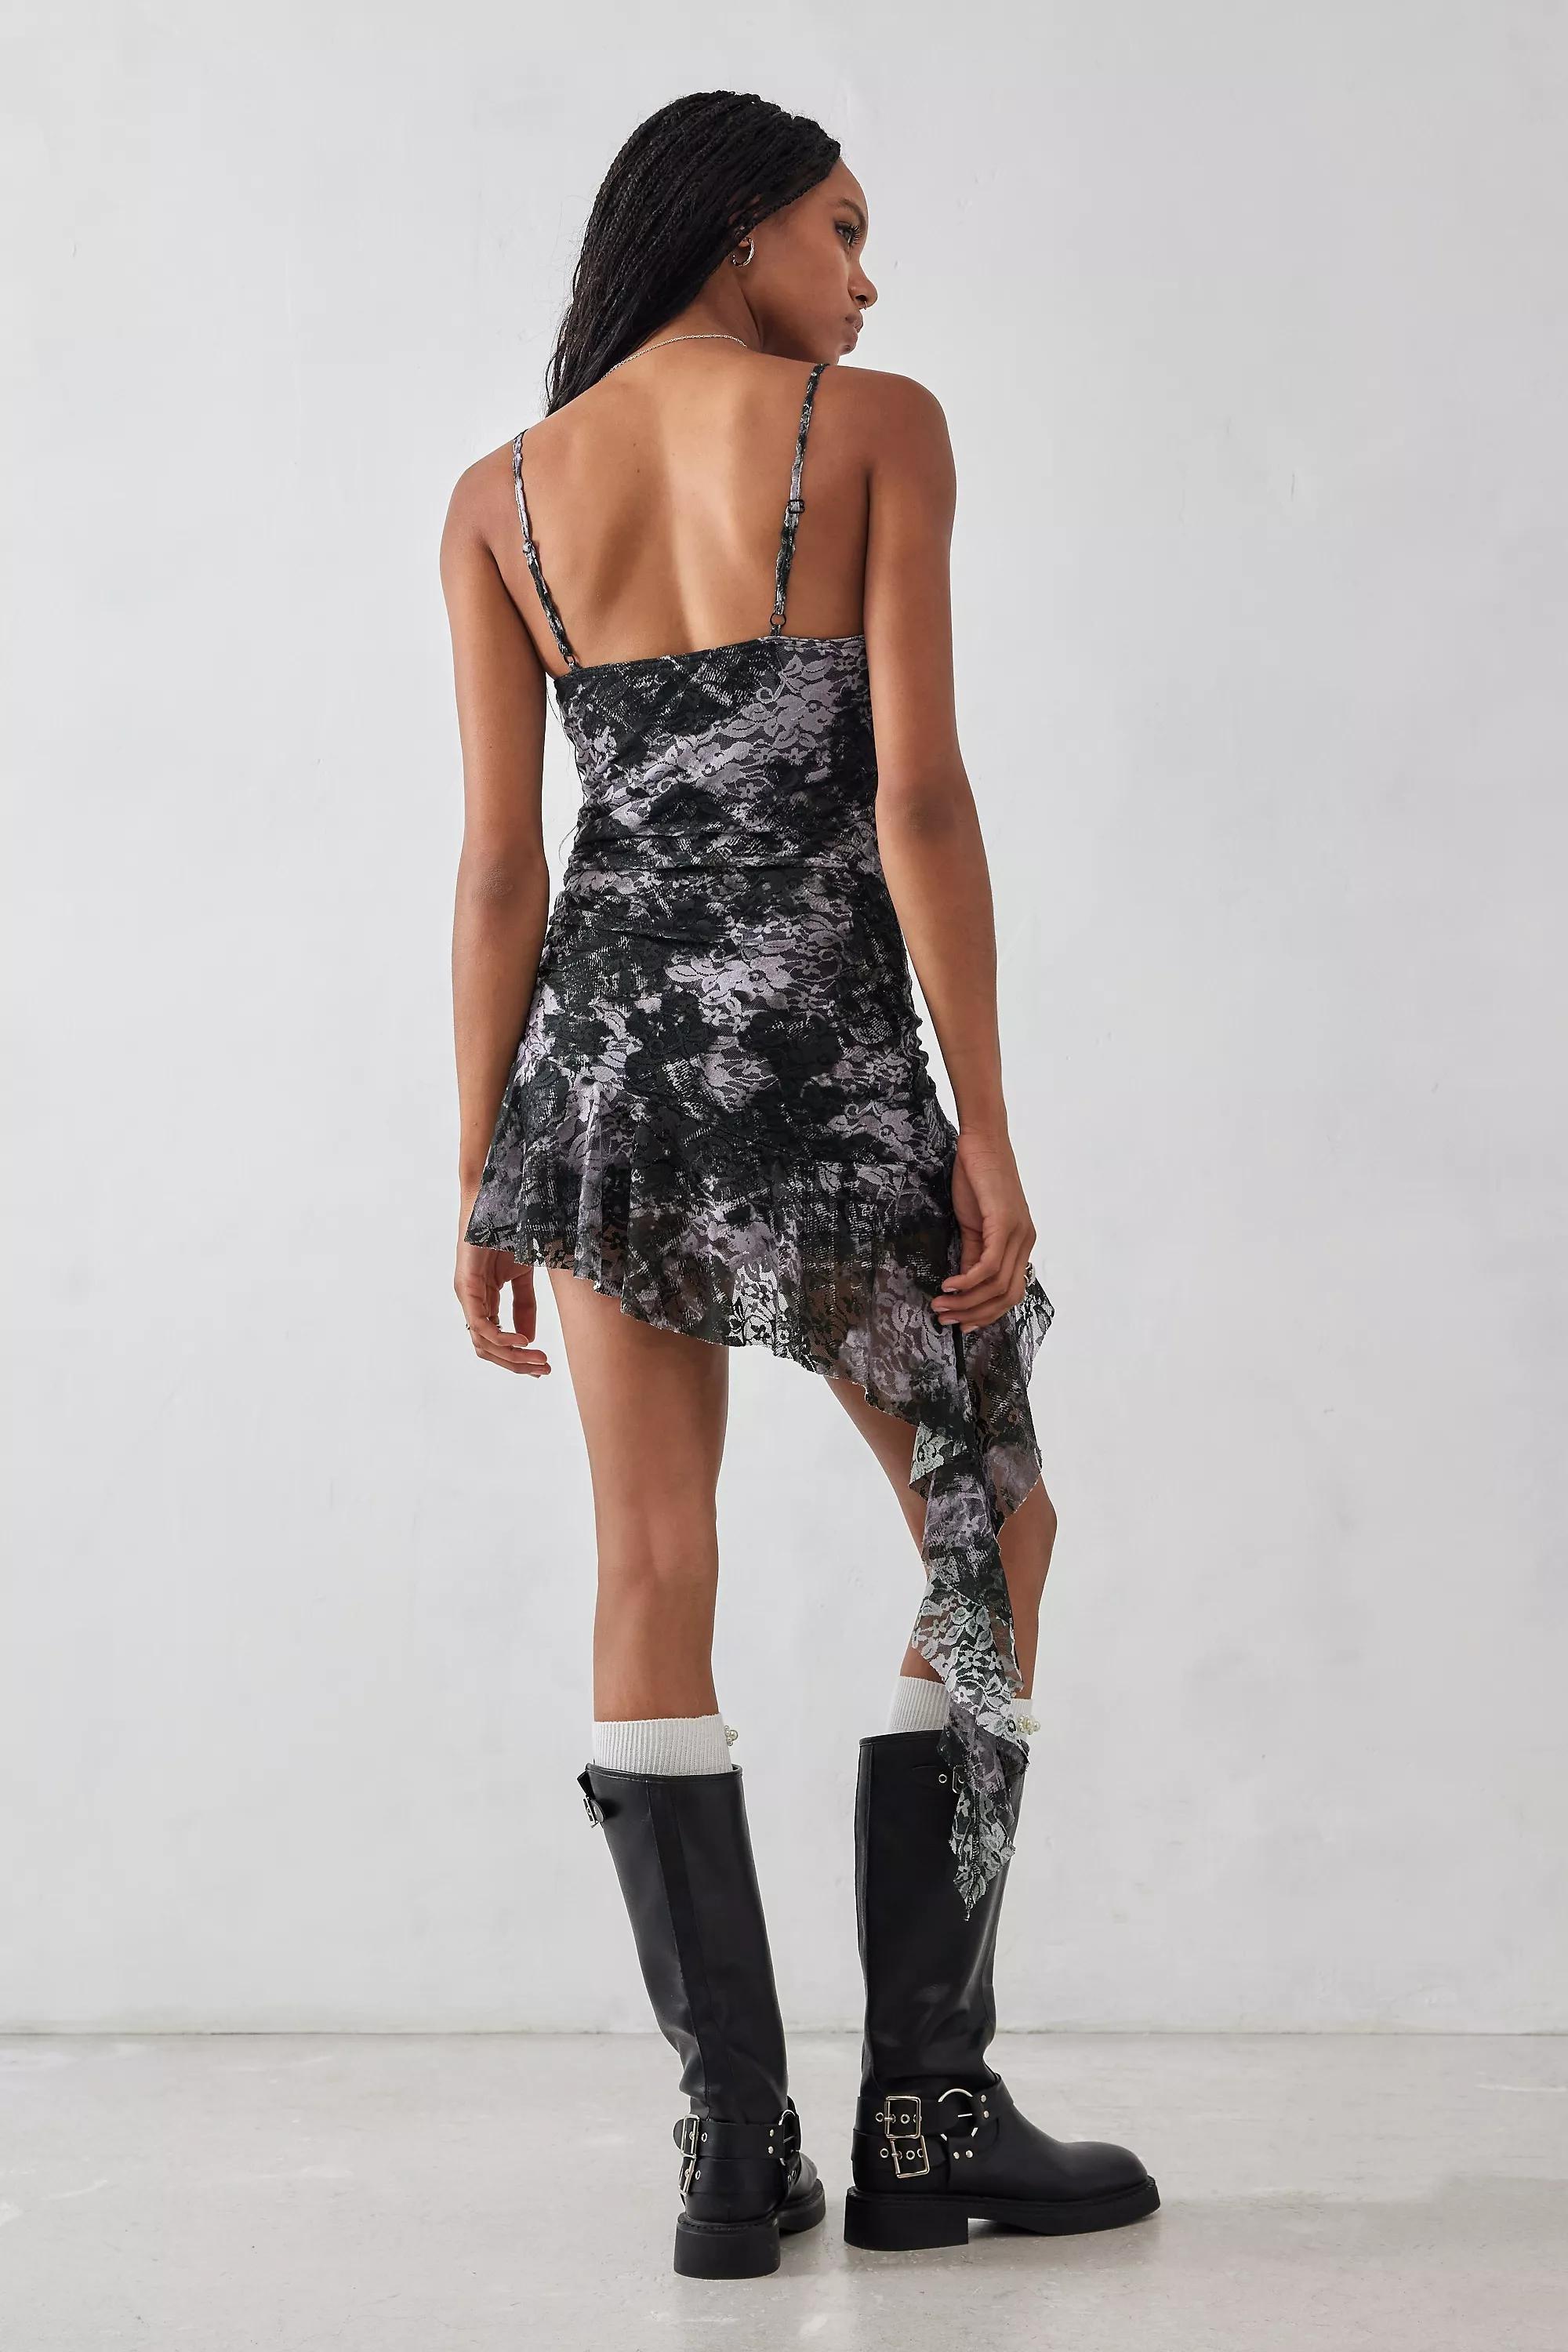 Urban Outfitters - Black Lace Insert Asymmetrical Playsuit